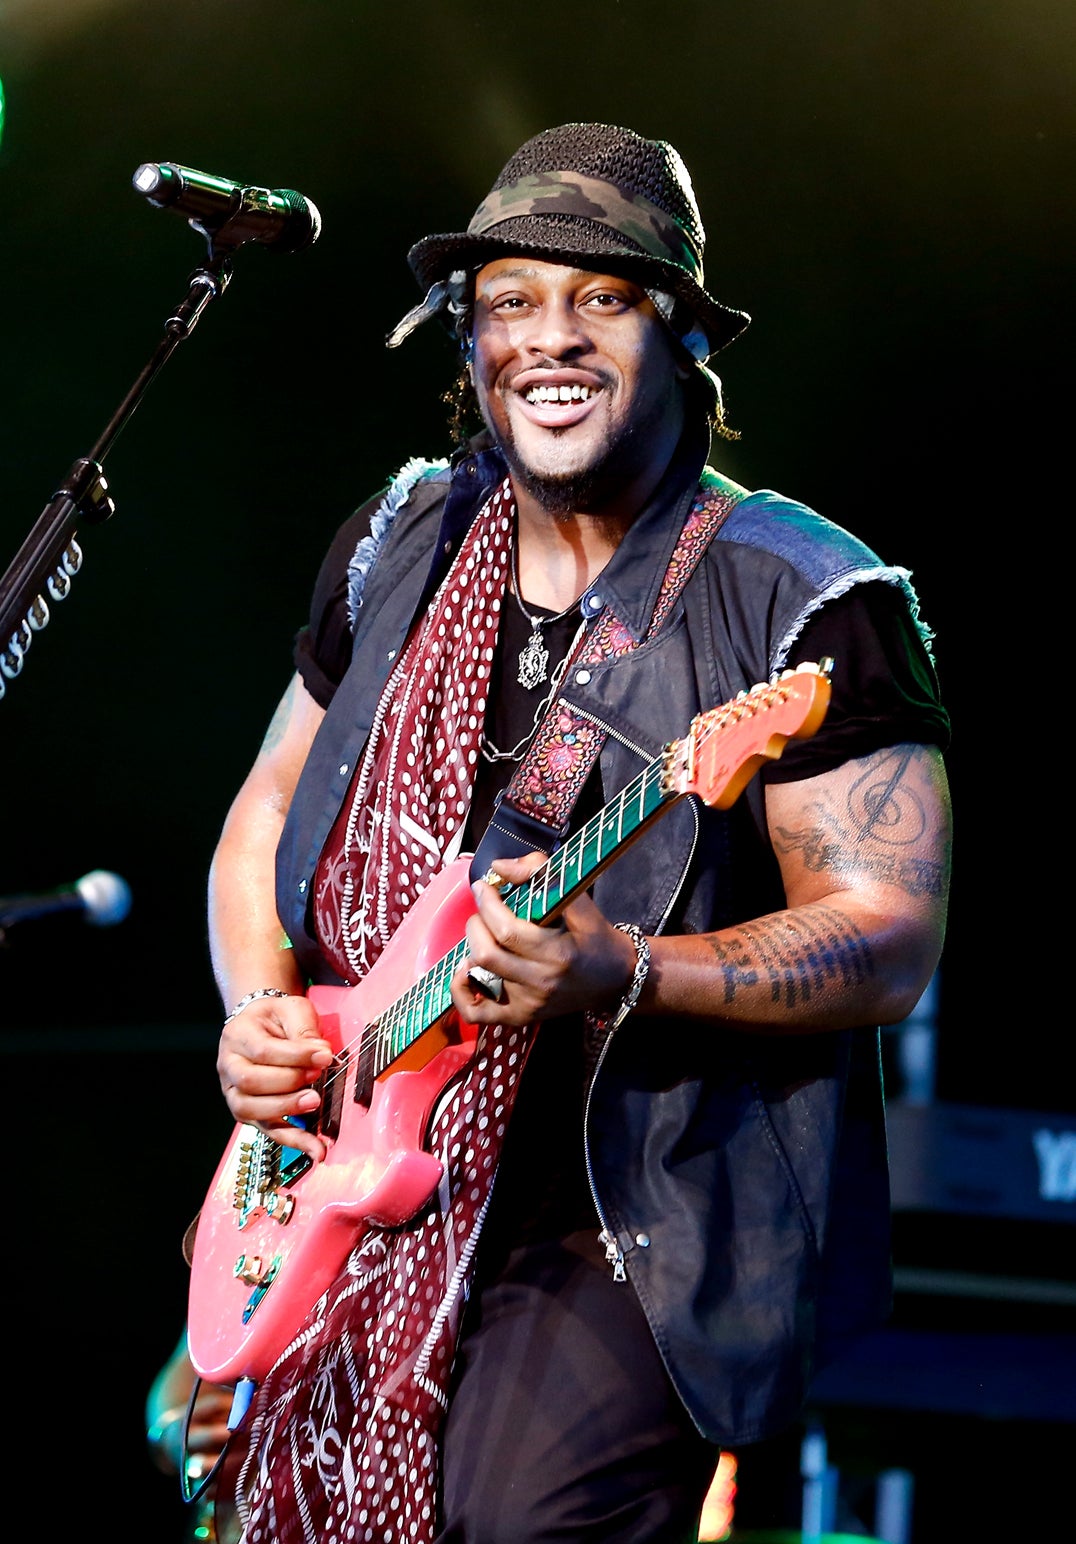 9 Things We Learned About D'Angelo from His Red Bull Music Academy Lecture